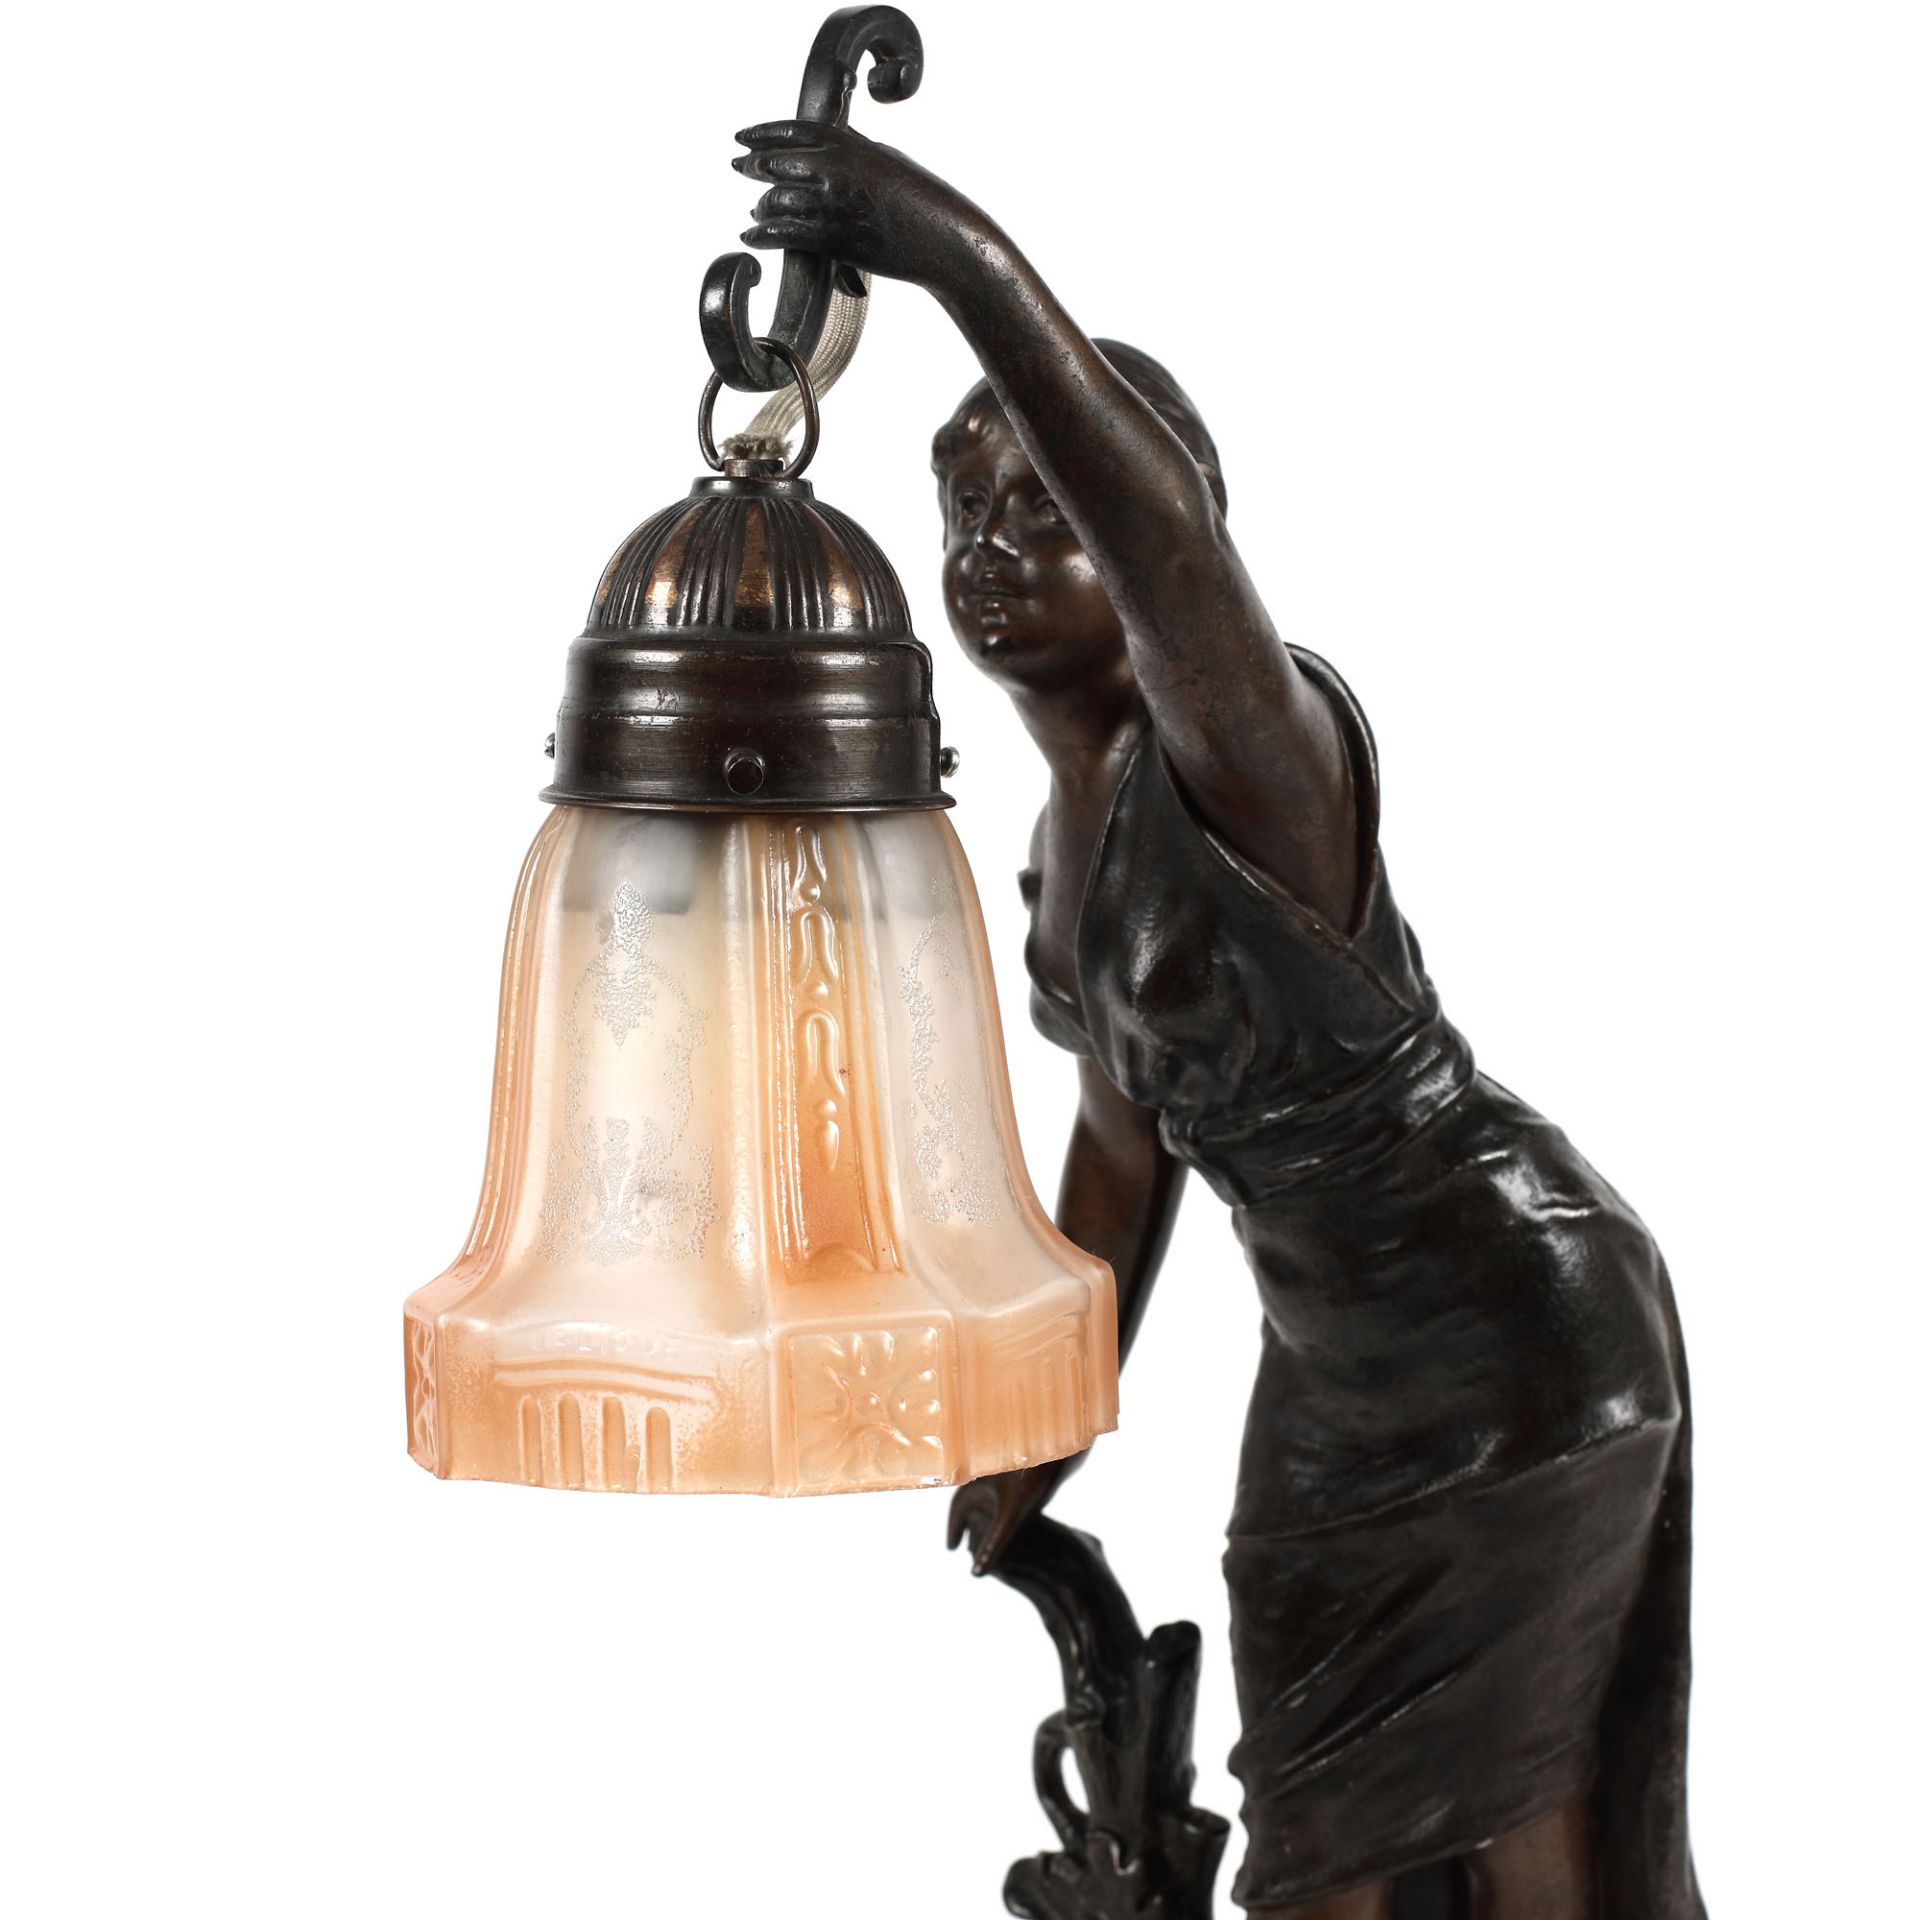 French workshop, Wrought iron lamp, Lalique glass, approx. 1930 - Image 3 of 5